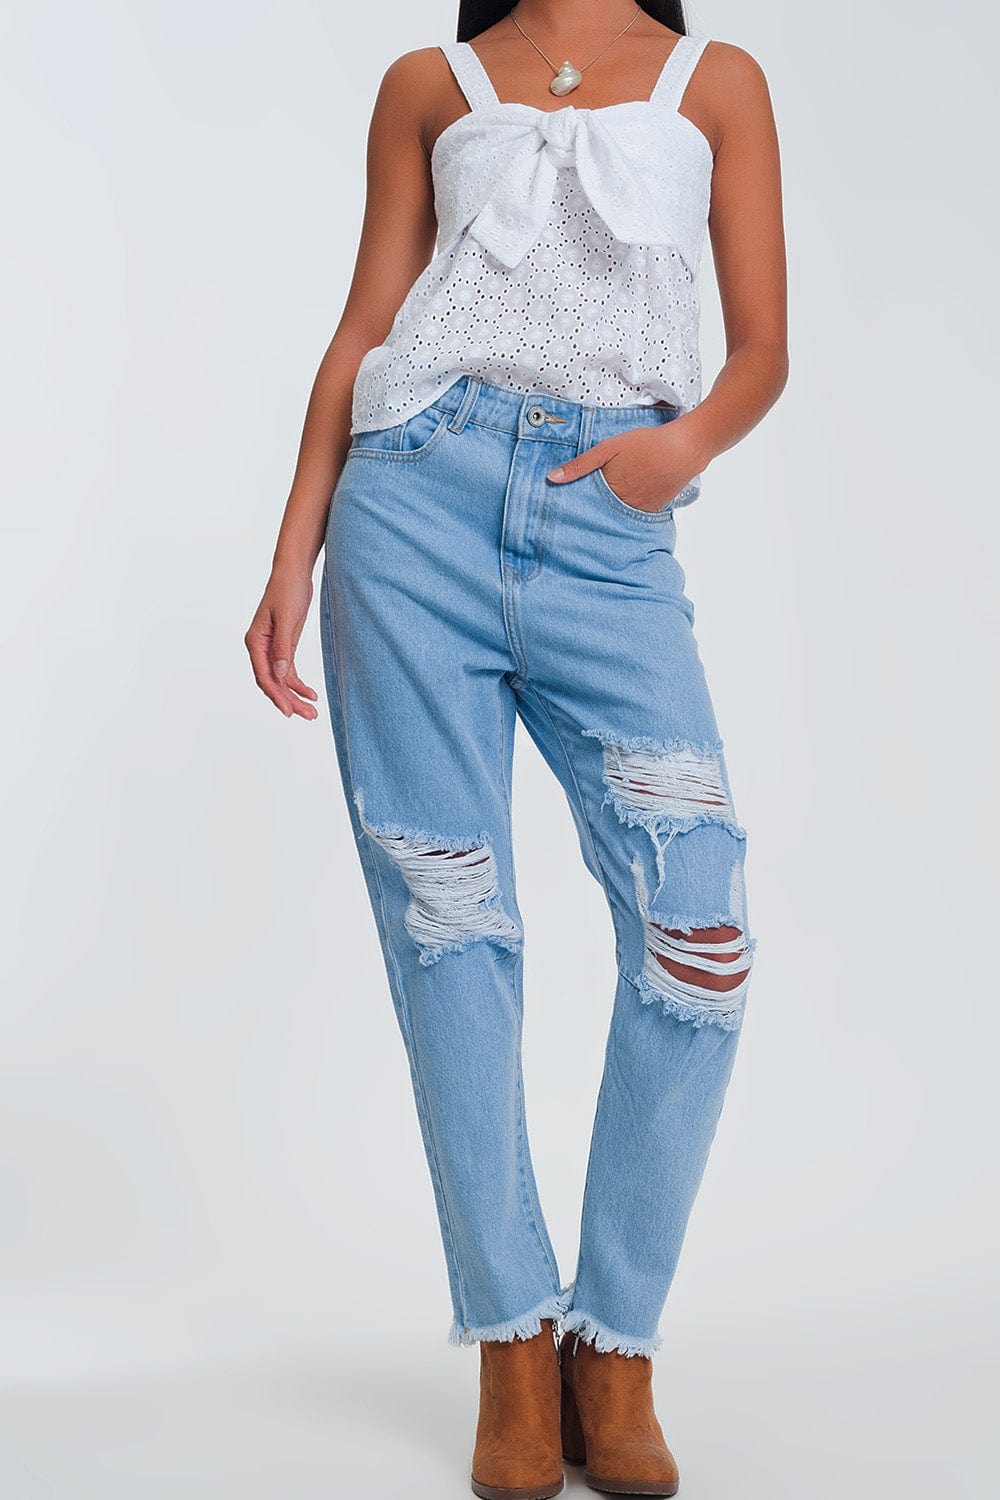 Q2 Jeans High waist mom jeans with busted knees in light denim